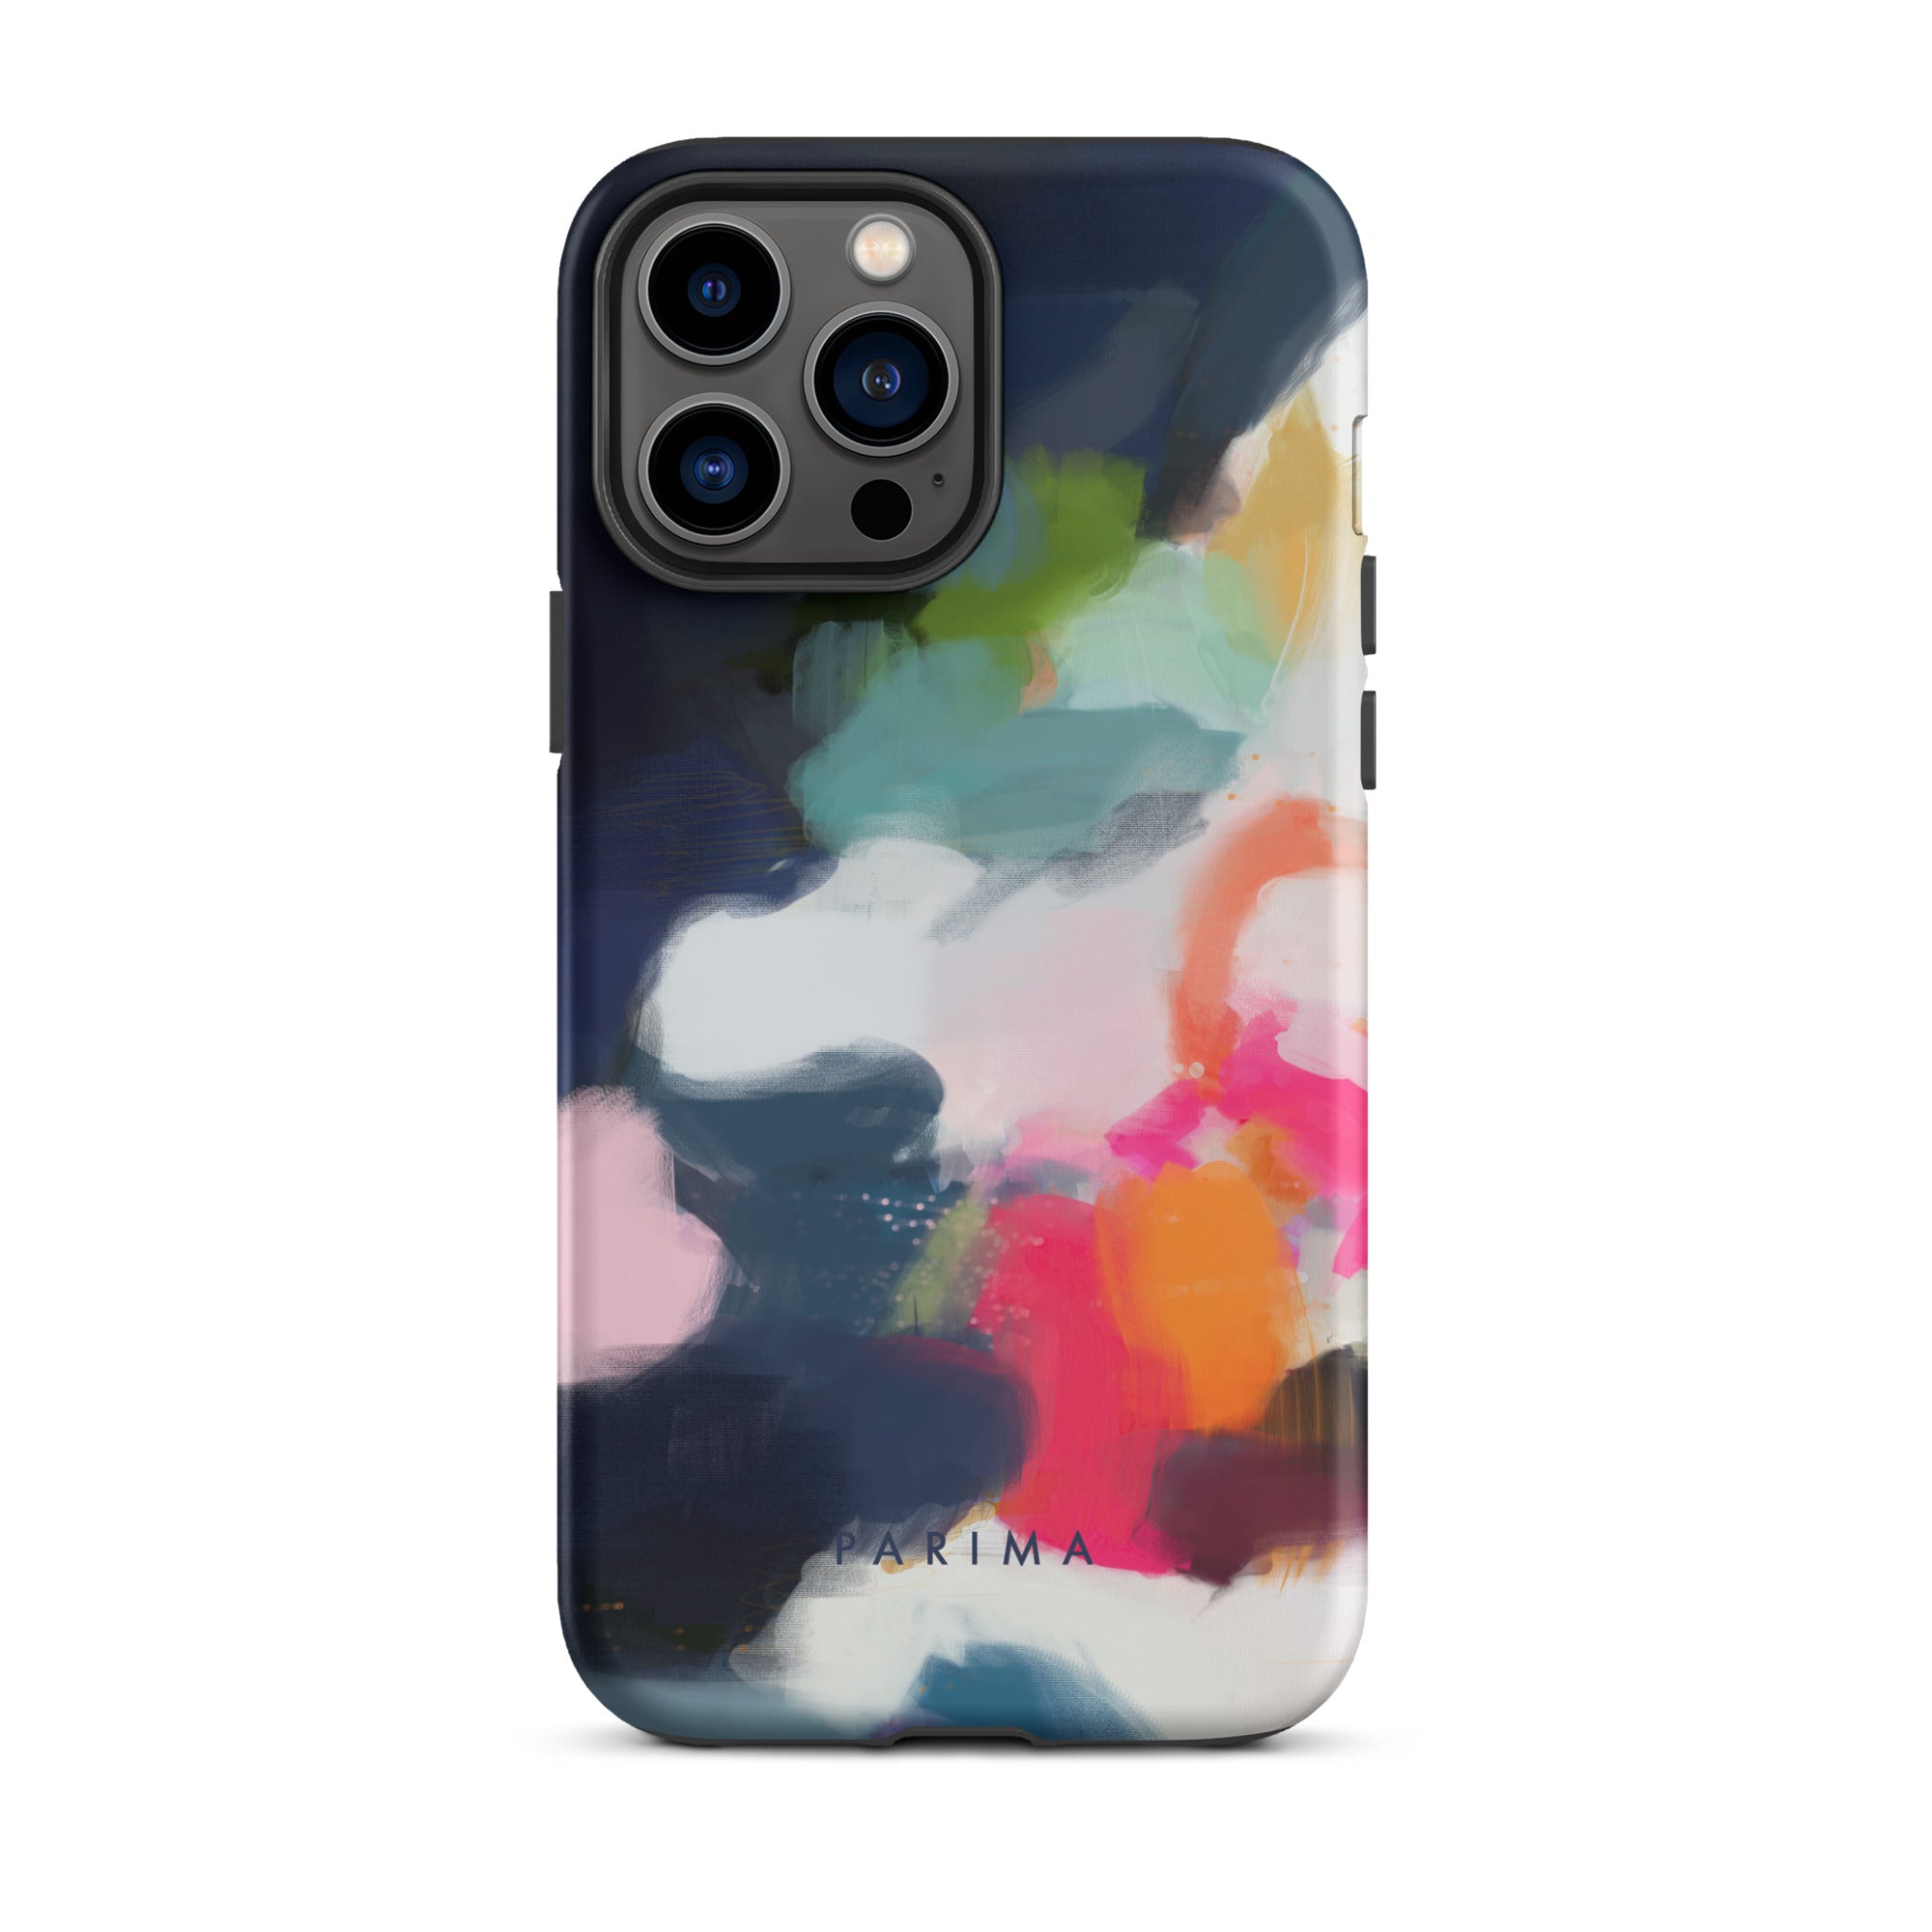 Eliza, pink and blue abstract art - iPhone 13 Pro Max tough case by Parima Studio